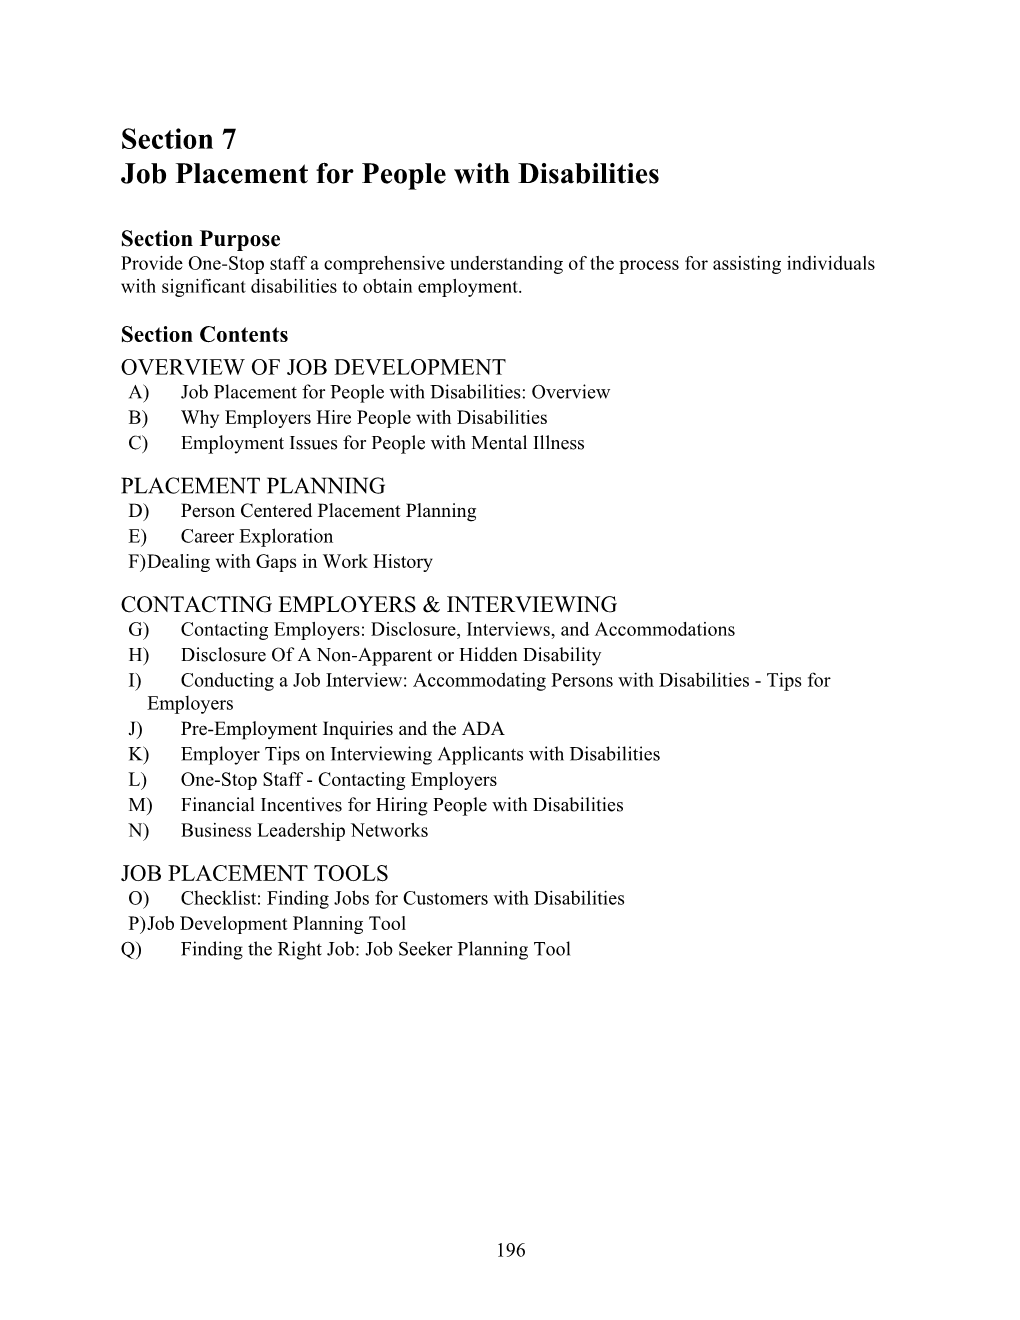 Job Placement for People with Disabilities